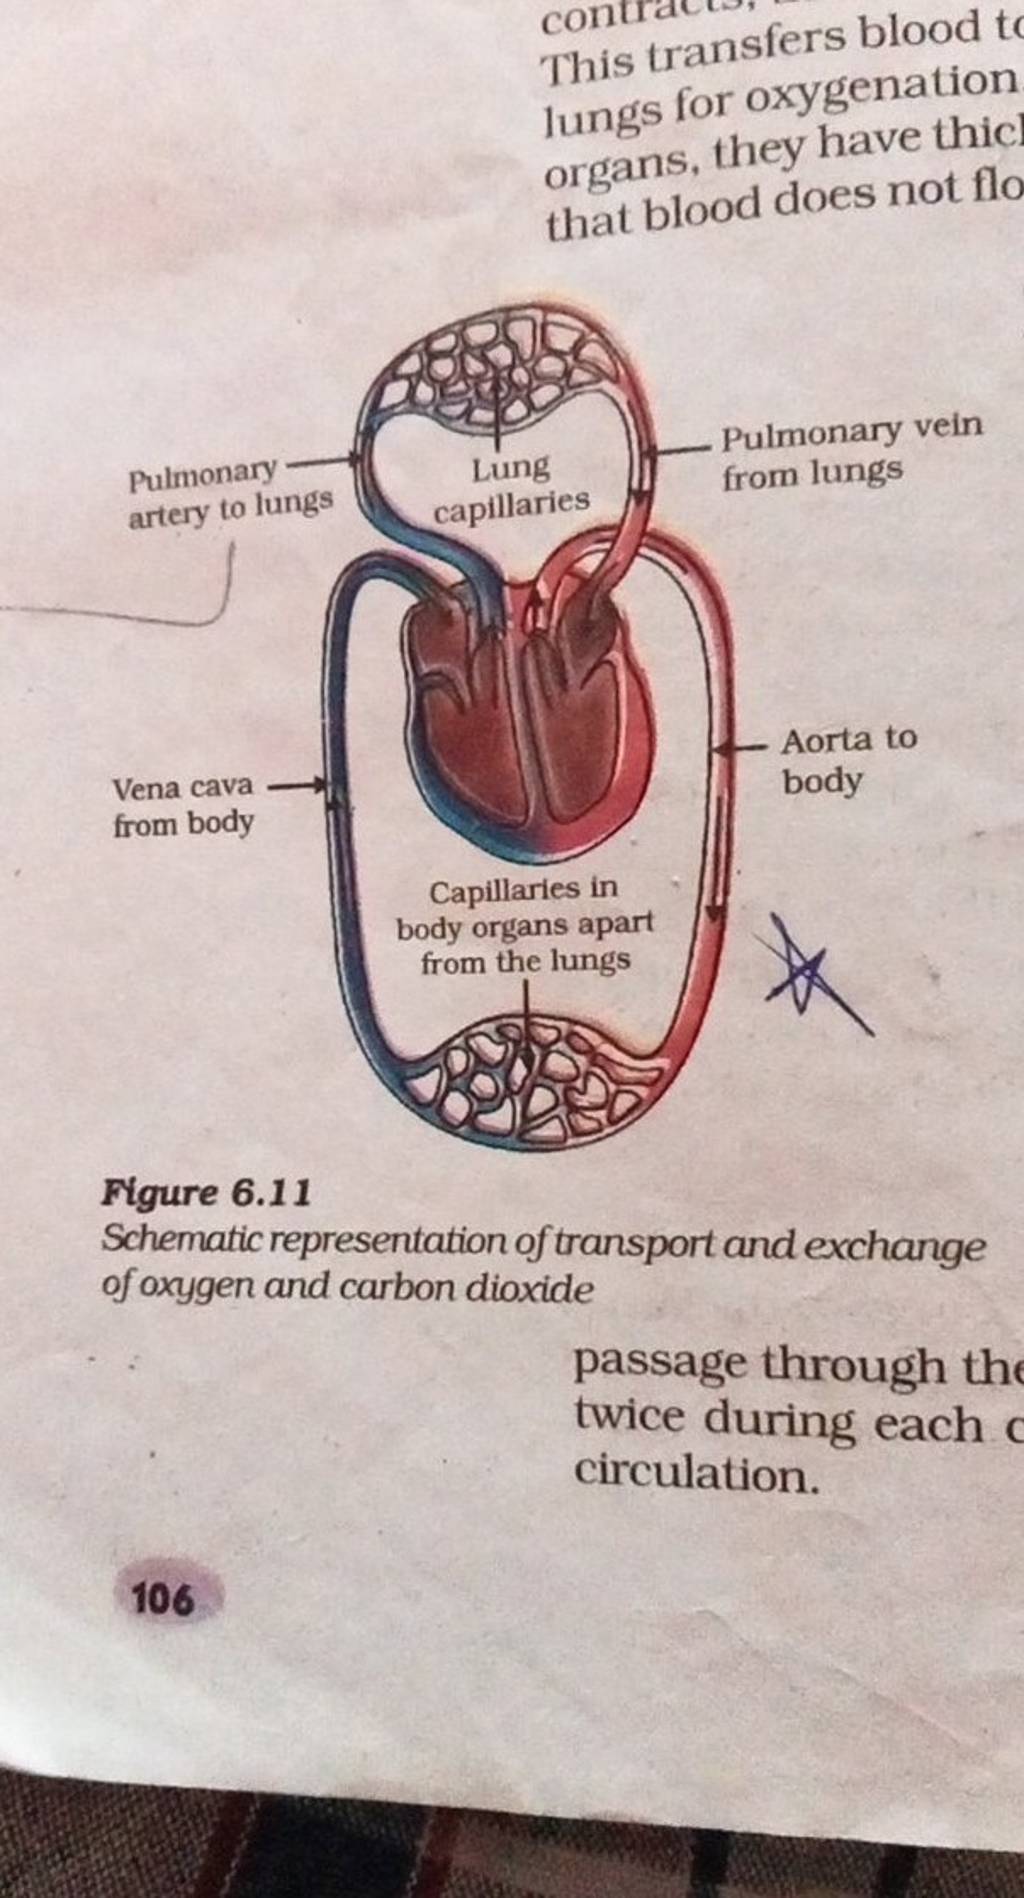 This transfers blood t lungs for oxygenation organs, they have thic that